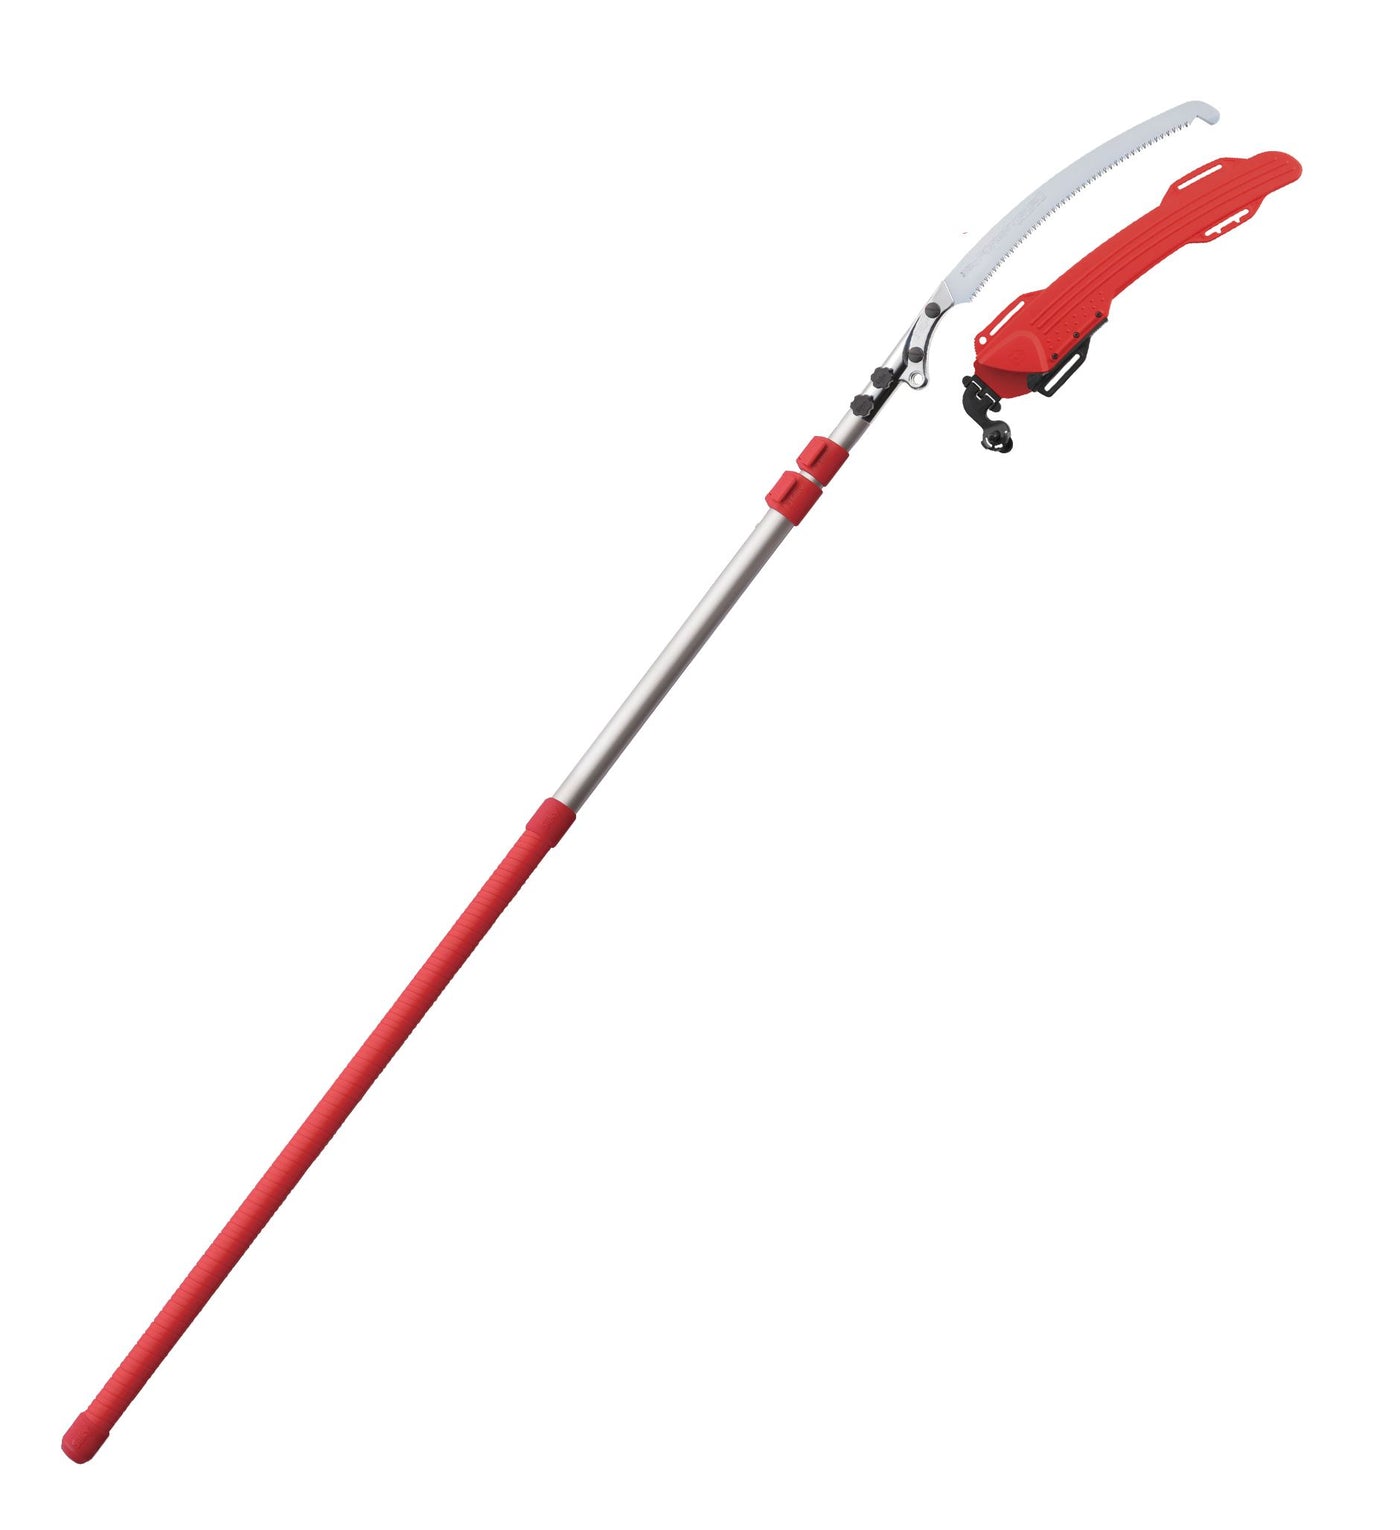 POLE SAW - Forester Professional